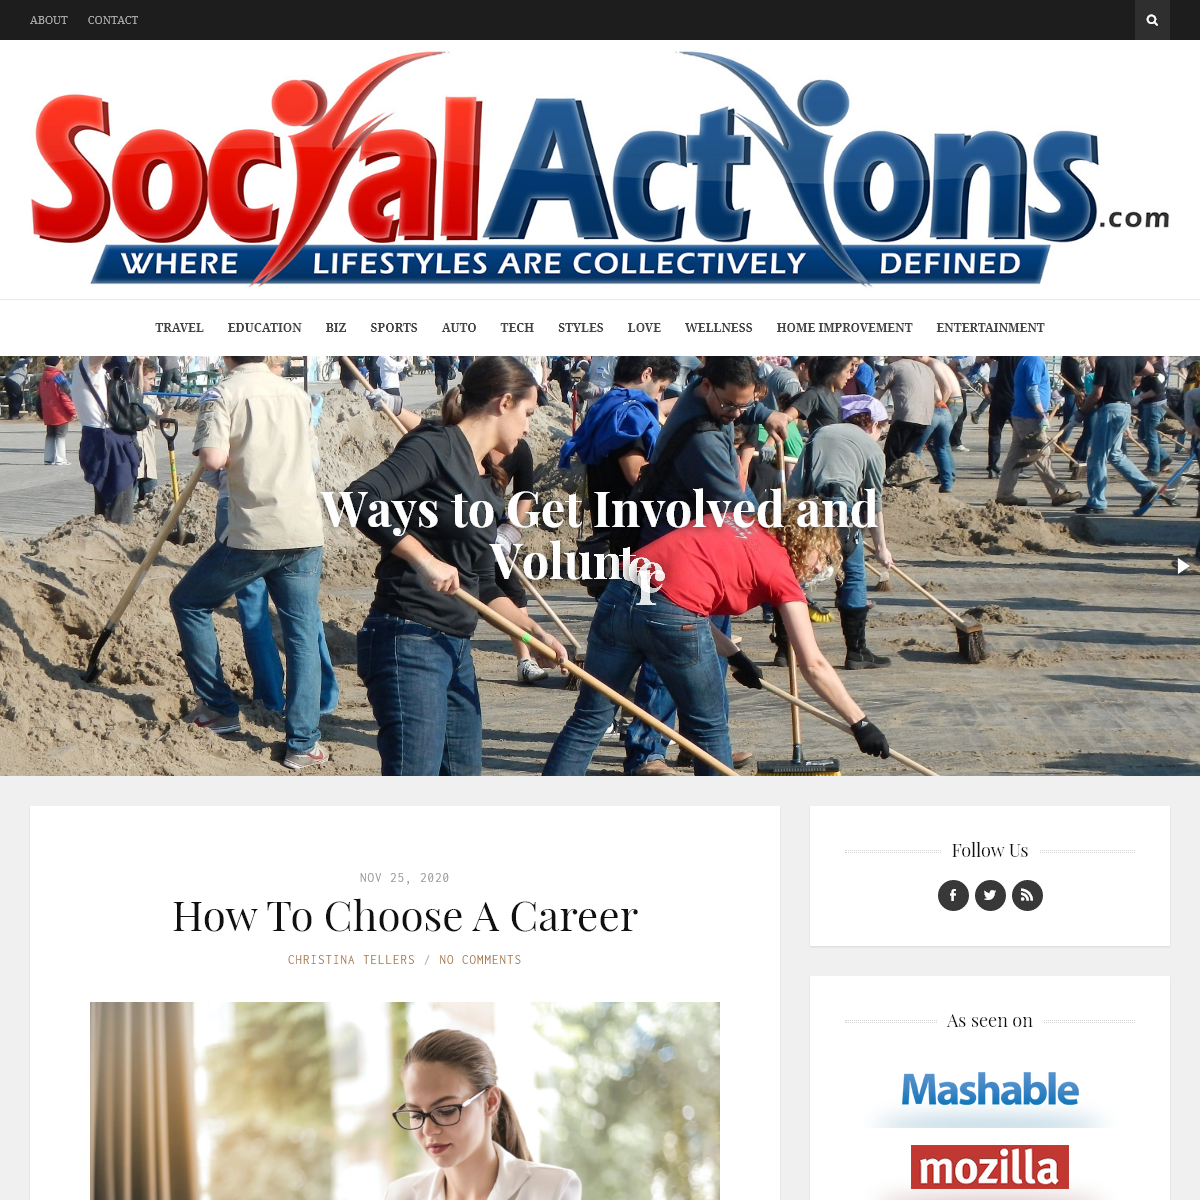 A complete backup of socialactions.com